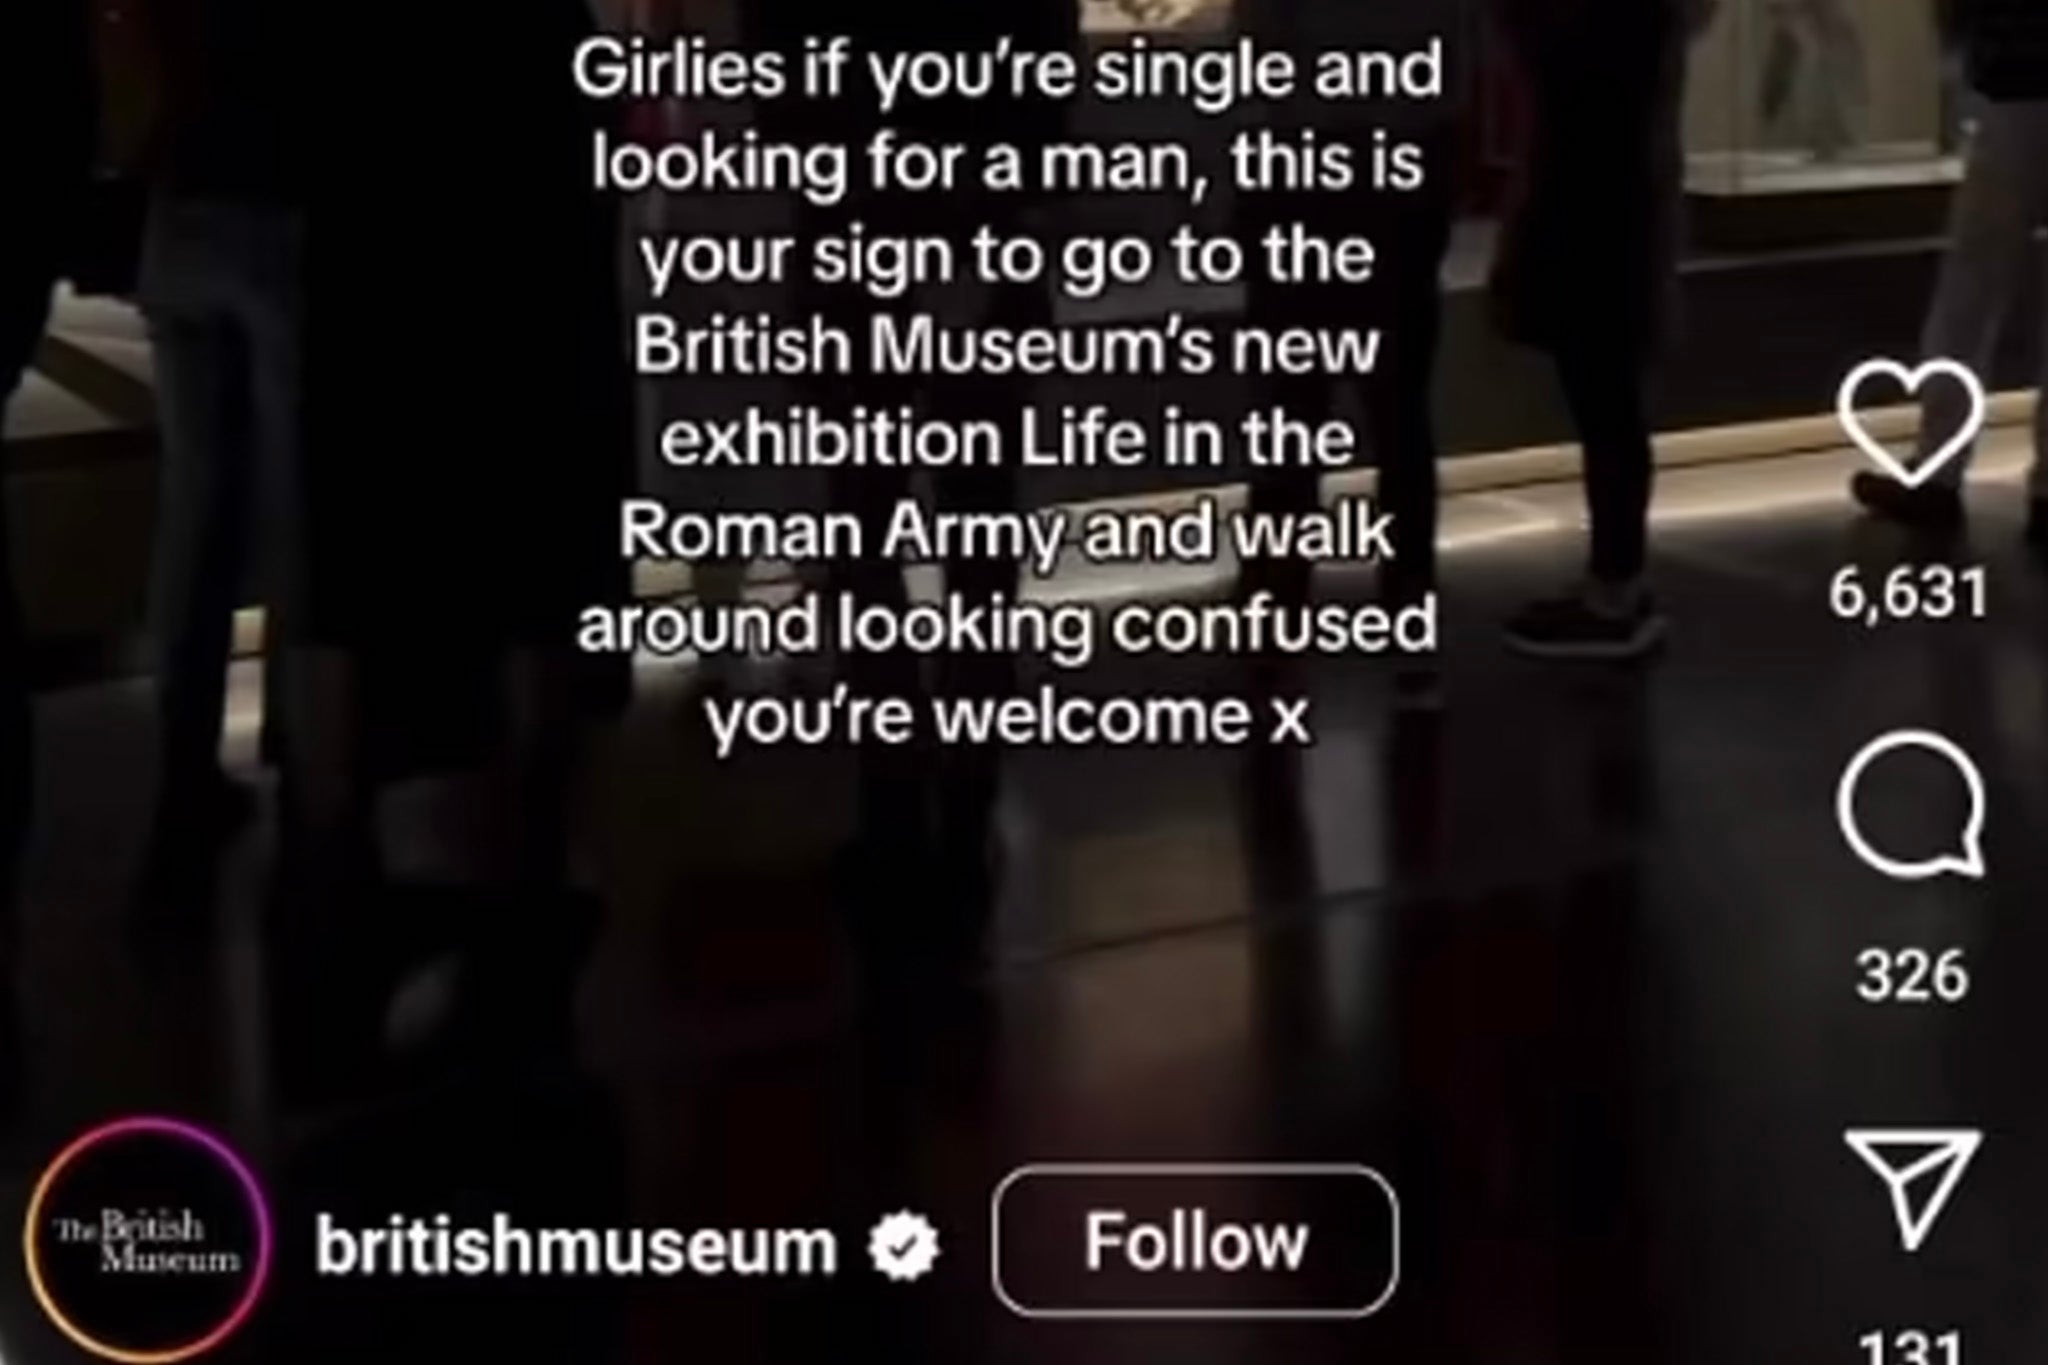 The TikTok video was uploaded to the museum’s account. It has since been deleted.